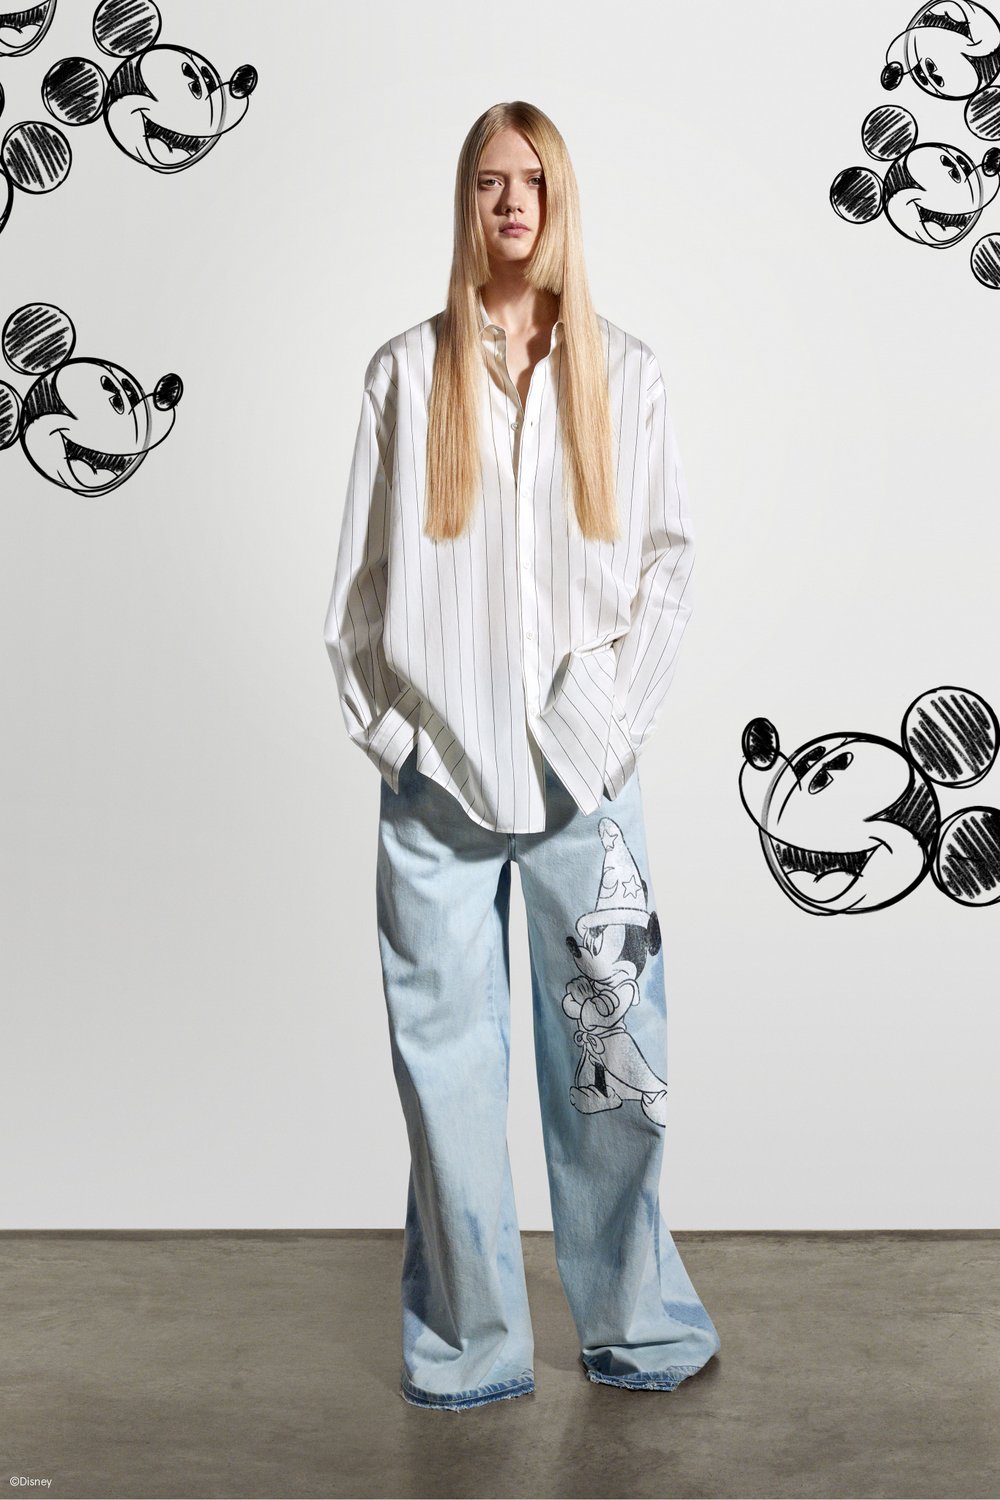 Stella McCartney Presents Disney Fantasia: The British Luxury House Meets the House of Mouse